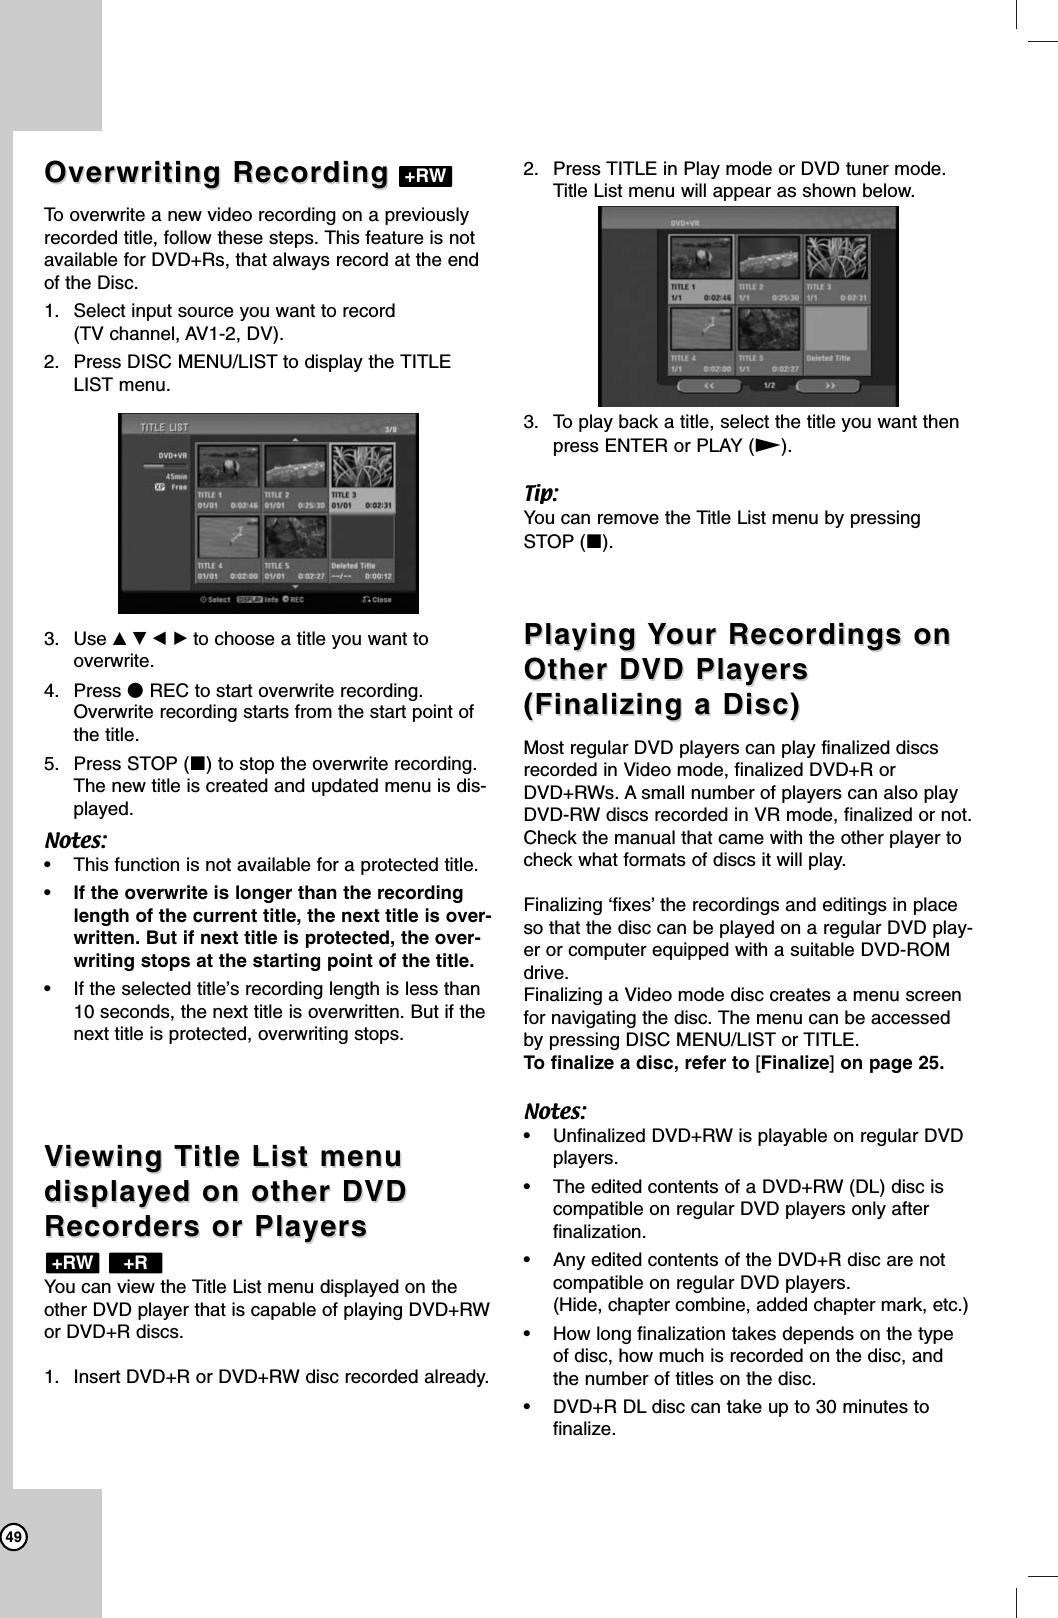 49Overwriting RecordingOverwriting RecordingTo overwrite a new video recording on a previouslyrecorded title, follow these steps. This feature is notavailable for DVD+Rs, that always record at the endof the Disc.1. Select input source you want to record (TV channel, AV1-2, DV). 2. Press DISC MENU/LIST to display the TITLELIST menu.3. Use vVbBto choose a title you want to overwrite.4. Press zREC to start overwrite recording.Overwrite recording starts from the start point ofthe title.5. Press STOP (x) to stop the overwrite recording.The new title is created and updated menu is dis-played.Notes:• This function is not available for a protected title. •If the overwrite is longer than the recordinglength of the current title, the next title is over-written. But if next title is protected, the over-writing stops at the starting point of the title.• If the selected title’s recording length is less than10 seconds, the next title is overwritten. But if thenext title is protected, overwriting stops.VViewing Tiewing Title List menu itle List menu displayed on other DVDdisplayed on other DVDRecorders or PlayersRecorders or PlayersYou can view the Title List menu displayed on theother DVD player that is capable of playing DVD+RWor DVD+R discs. 1. Insert DVD+R or DVD+RW disc recorded already.2. Press TITLE in Play mode or DVD tuner mode.Title List menu will appear as shown below.3. To play back a title, select the title you want thenpress ENTER or PLAY (N).Tip:You can remove the Title List menu by pressingSTOP (x).Playing Playing YYour Recordings onour Recordings onOther DVD PlayersOther DVD Players(Finalizing a Disc)(Finalizing a Disc)Most regular DVD players can play finalized discsrecorded in Video mode, finalized DVD+R orDVD+RWs. A small number of players can also playDVD-RW discs recorded in VR mode, finalized or not.Check the manual that came with the other player tocheck what formats of discs it will play.Finalizing ‘fixes’ the recordings and editings in placeso that the disc can be played on a regular DVD play-er or computer equipped with a suitable DVD-ROMdrive.Finalizing a Video mode disc creates a menu screenfor navigating the disc. The menu can be accessedby pressing DISC MENU/LIST or TITLE. To finalize a disc, refer to [Finalize]on page 25.Notes:• Unfinalized DVD+RW is playable on regular DVDplayers.• The edited contents of a DVD+RW (DL) disc iscompatible on regular DVD players only afterfinalization.• Any edited contents of the DVD+R disc are not compatible on regular DVD players.(Hide, chapter combine, added chapter mark, etc.)• How long finalization takes depends on the typeof disc, how much is recorded on the disc, andthe number of titles on the disc. • DVD+R DL disc can take up to 30 minutes to finalize.+R+RW+RW